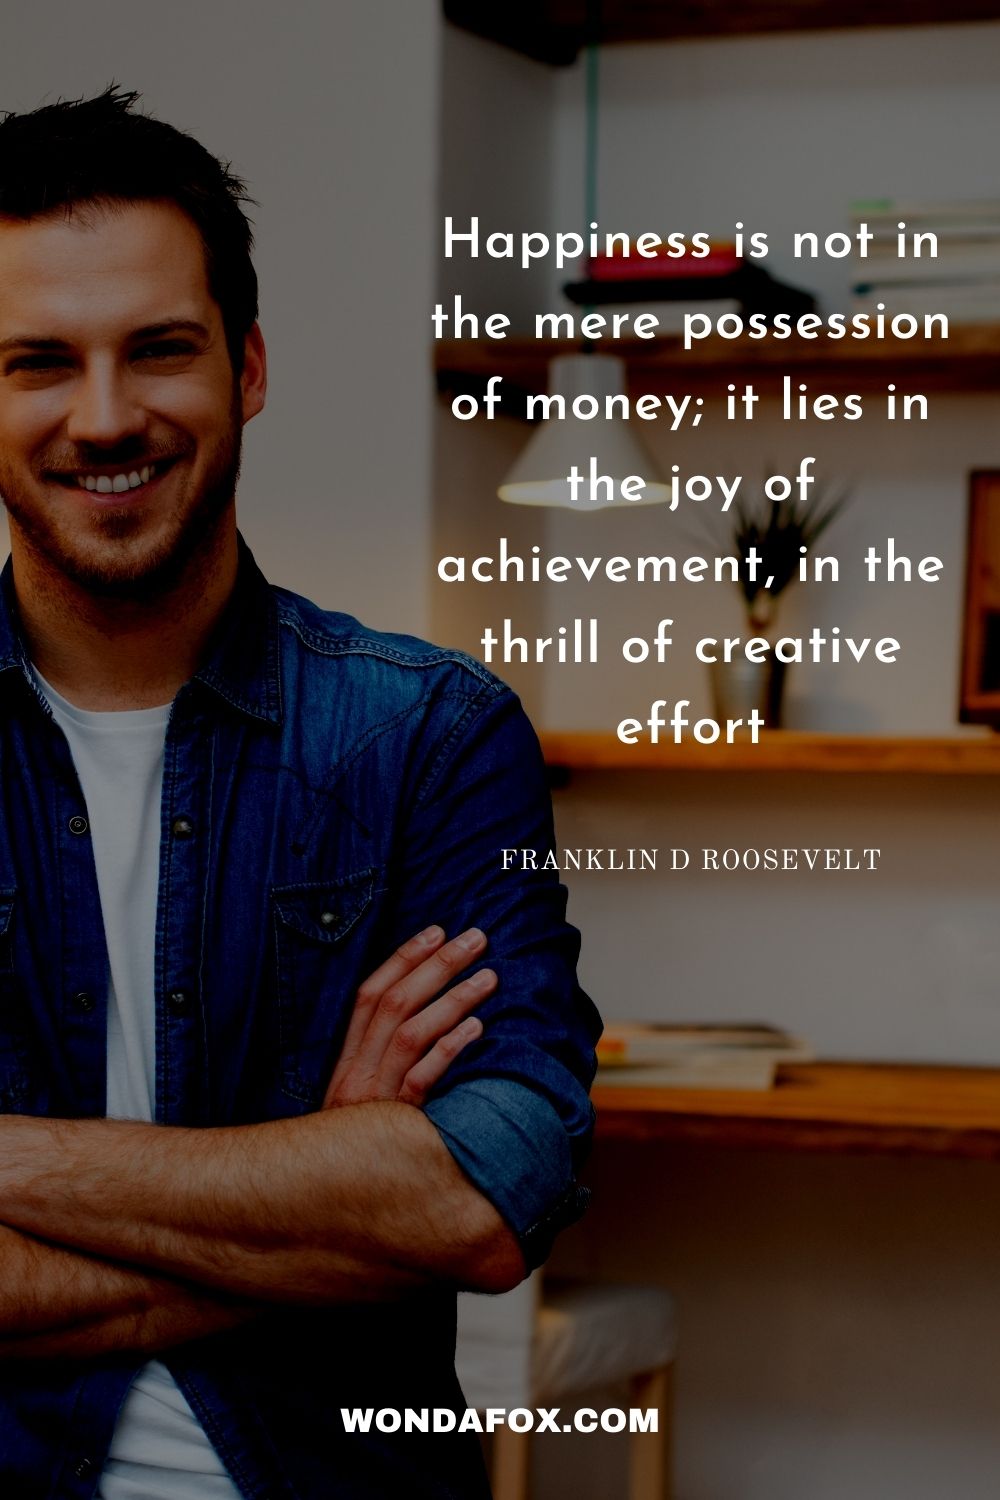 Happiness is not in the mere possession of money; it lies in the joy of achievement, in the thrill of creative effort